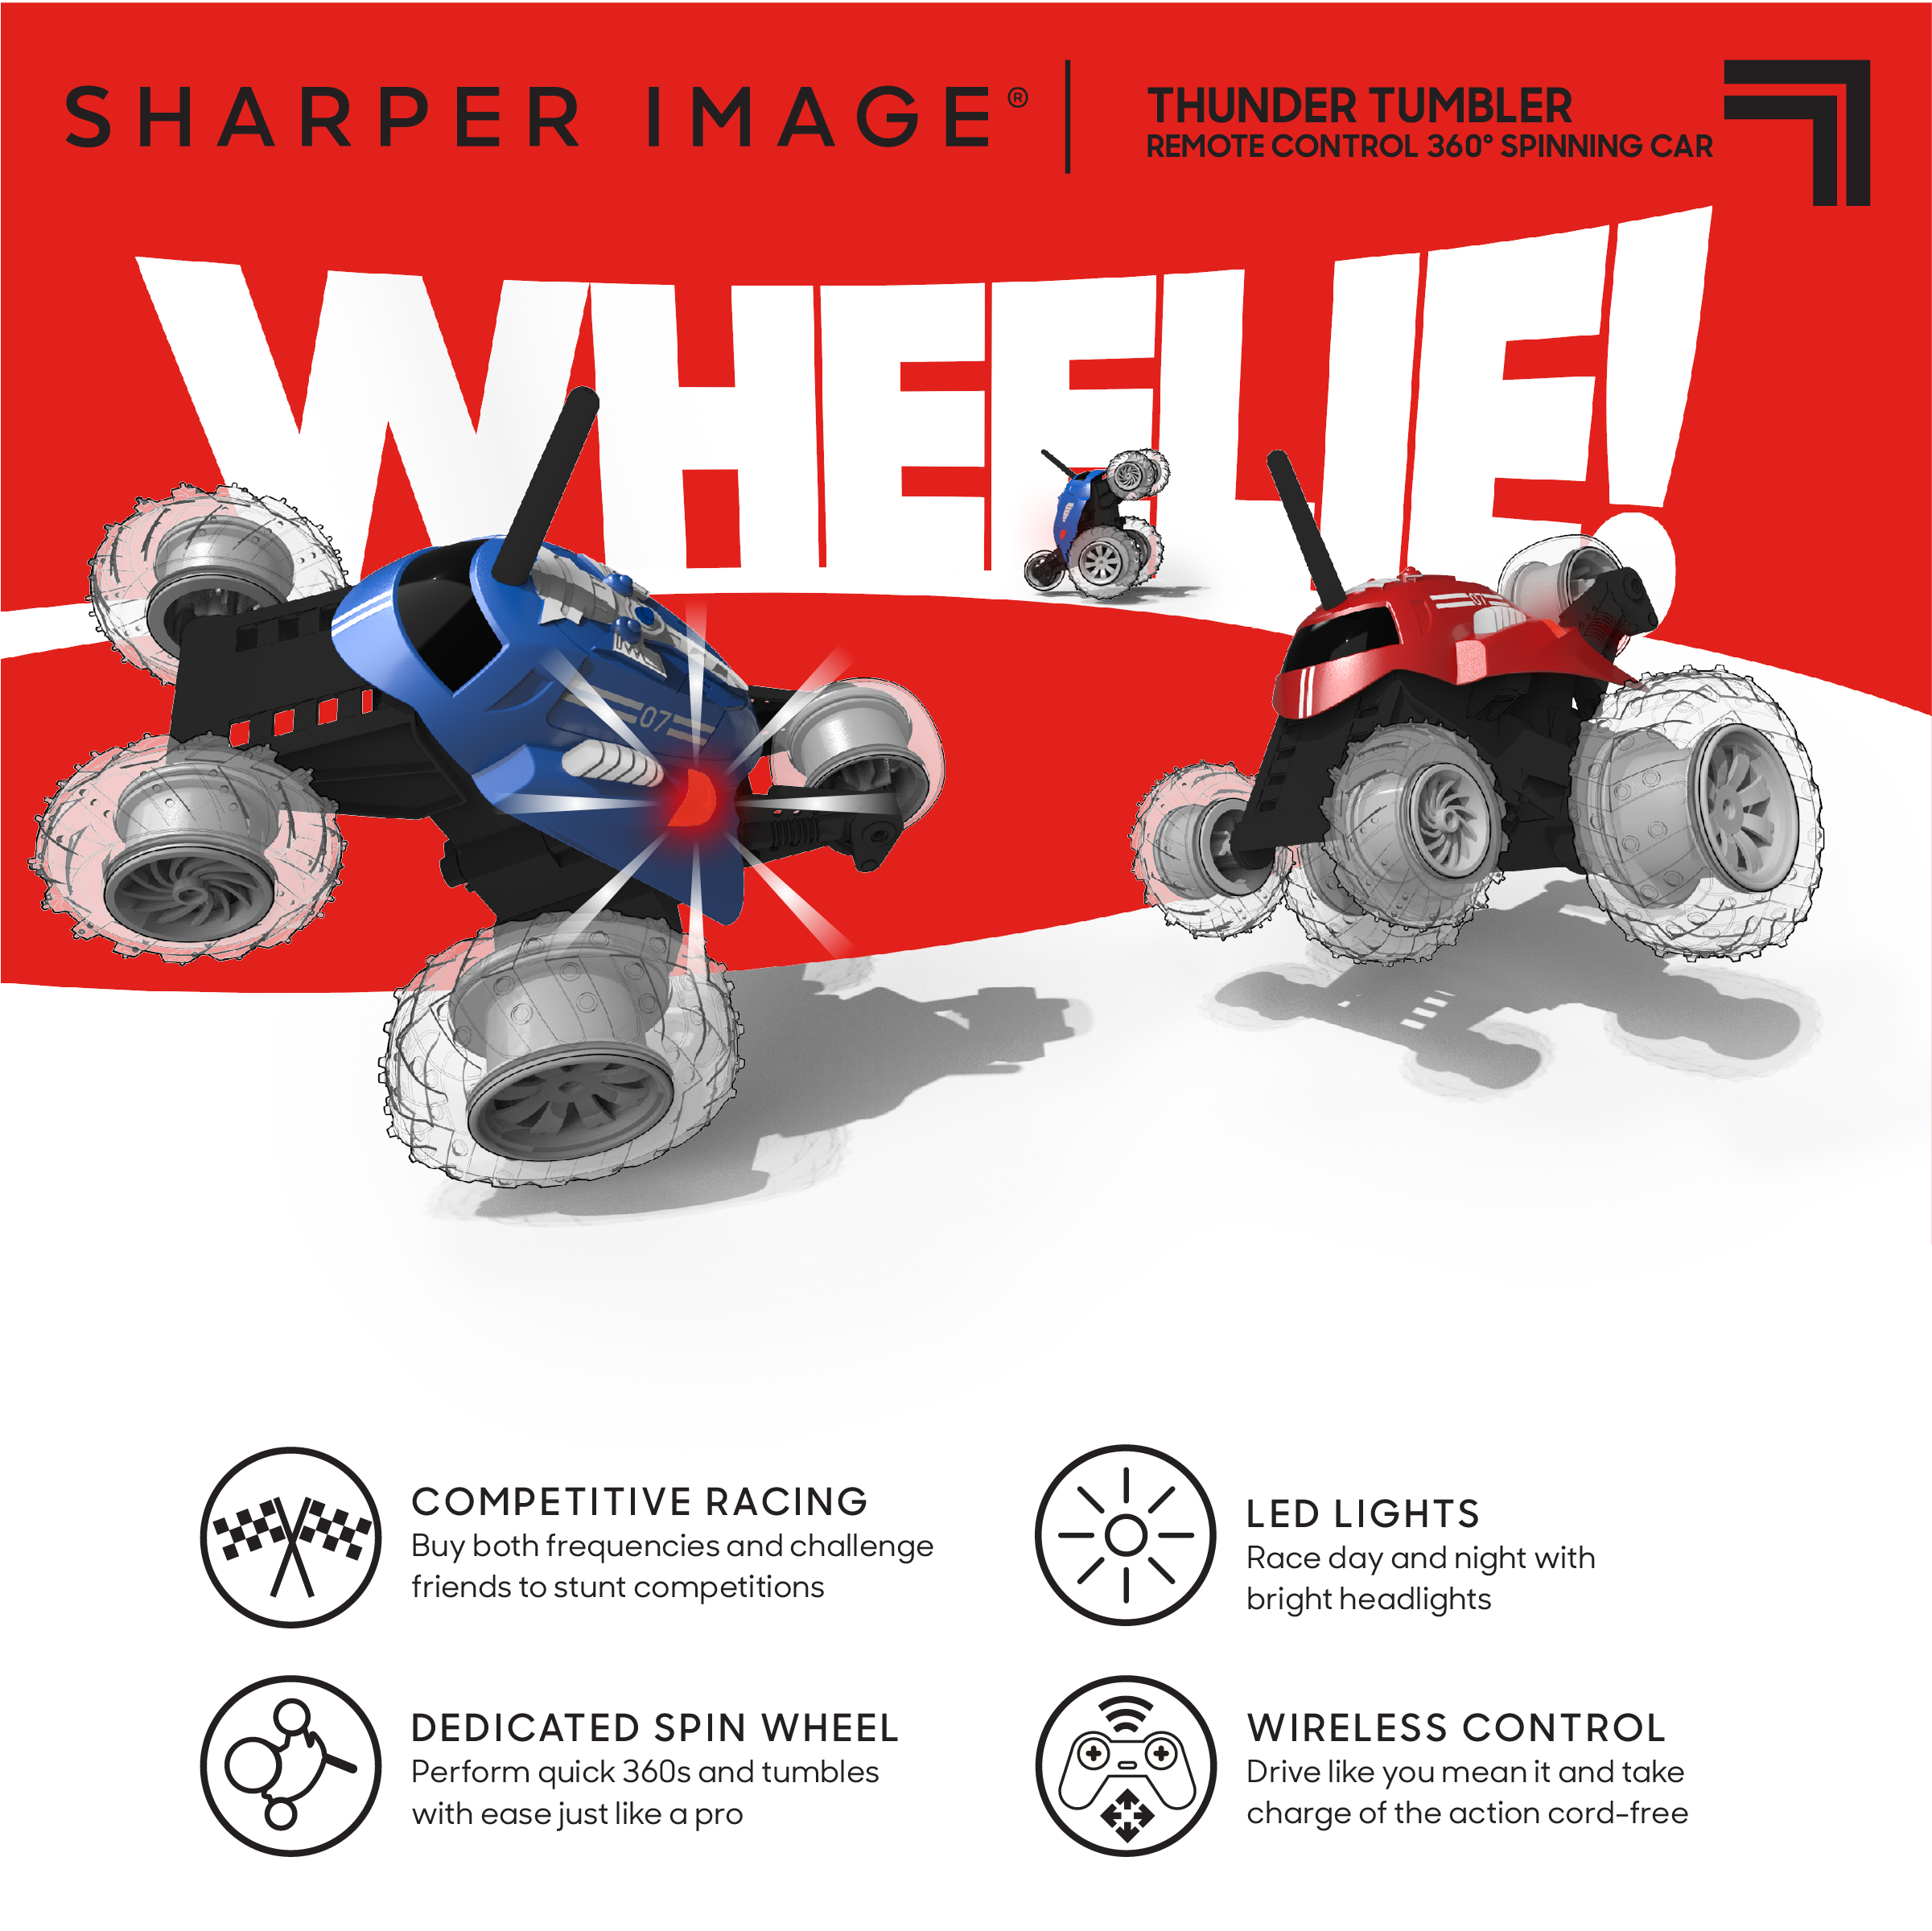 SHARPER IMAGE Thunder Tumbler Toy RC Car for Kids, Remote Control Monster Spinning Stunt Mini Truck for Girls and Boys, Racing Flips and Tricks with 5th Wheel, 49 MHz Black - image 4 of 14